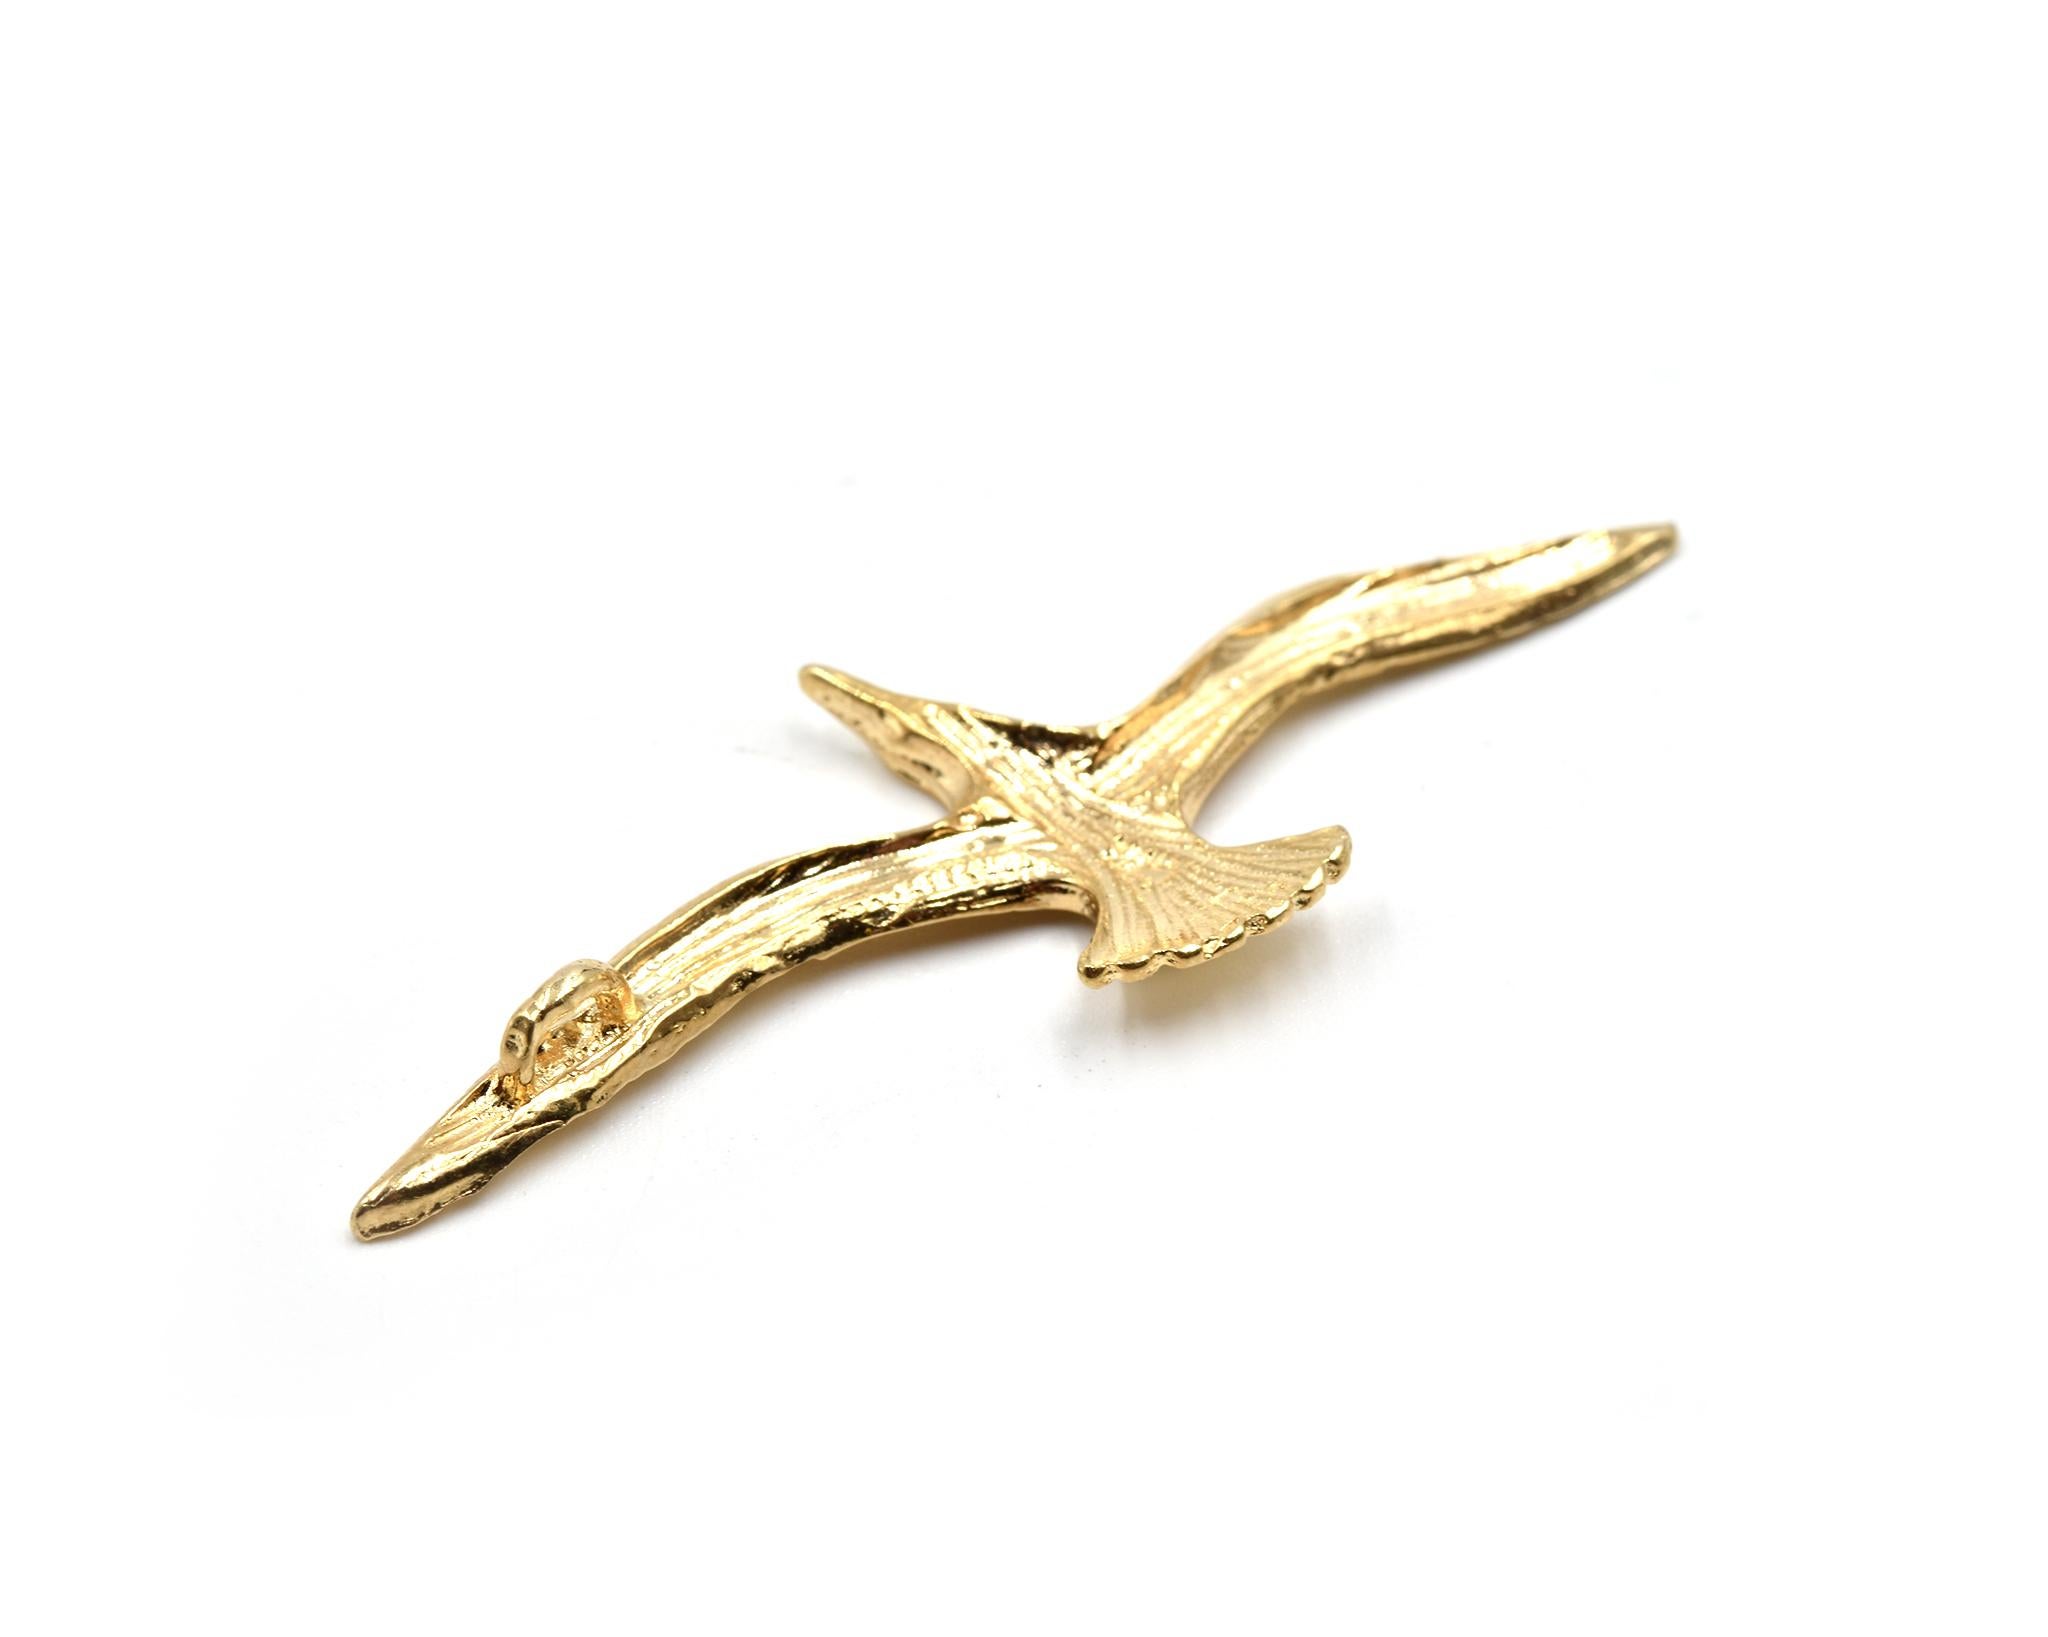 Designer: custom design
Material: 14k yellow gold
Dimensions: bird pendant is 2 1/2-inch long and 3/4-inch wide
Weight: 4.64 grams
